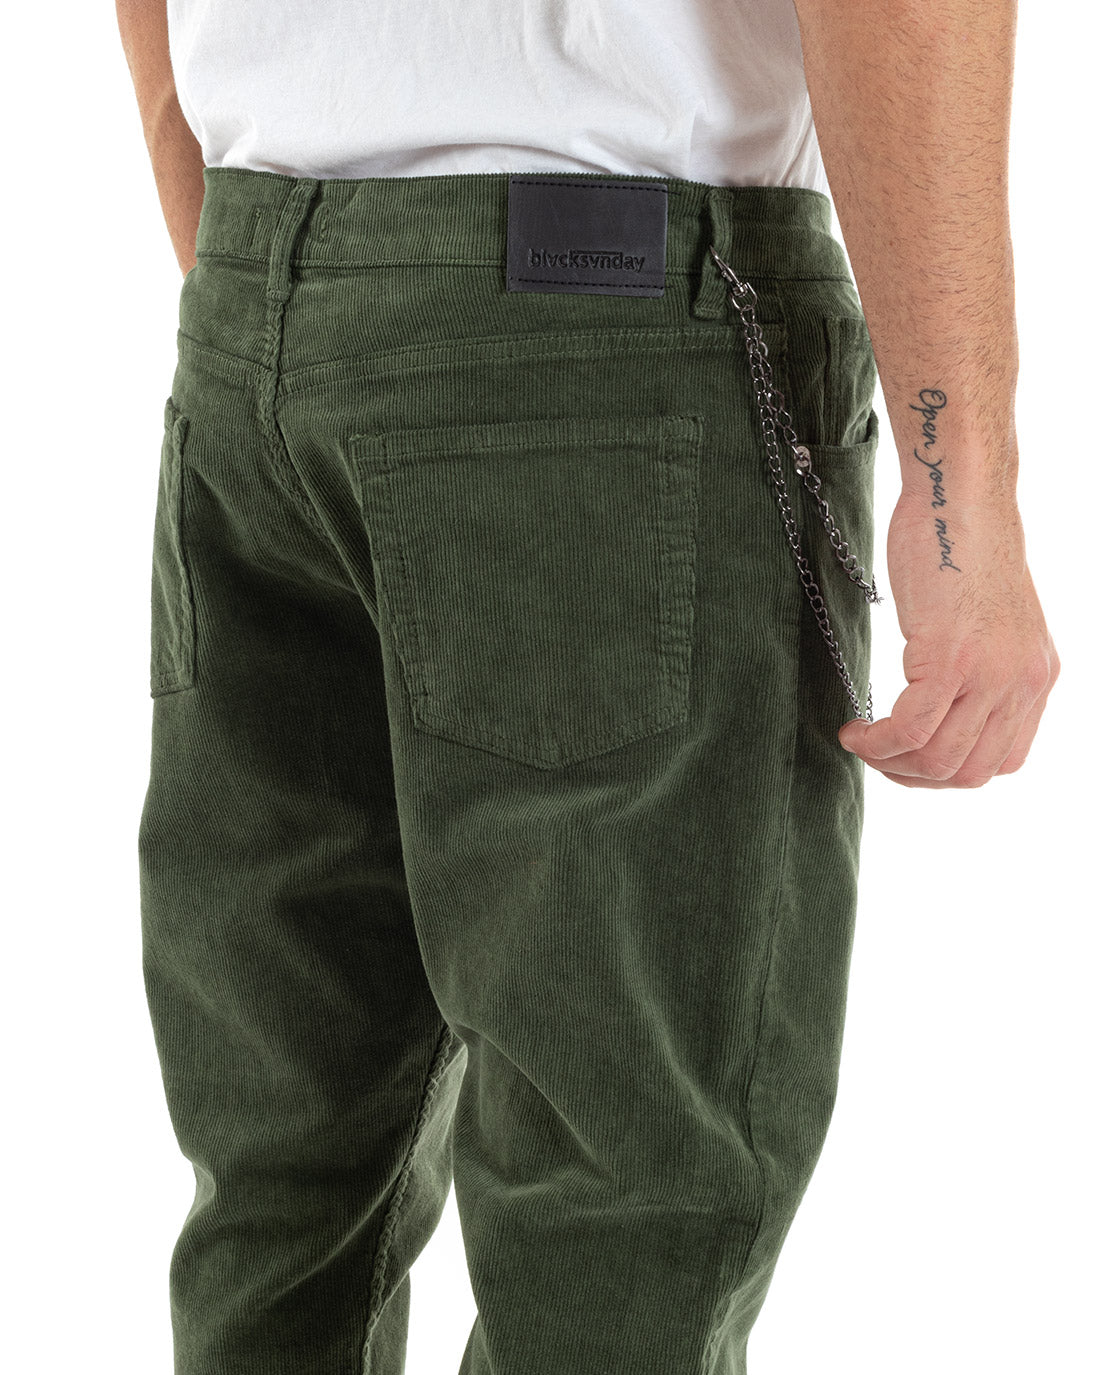 Men's Long Velvet Solid Color Shiny Casual Five Pocket Trousers Green GIOSAL-P5574A